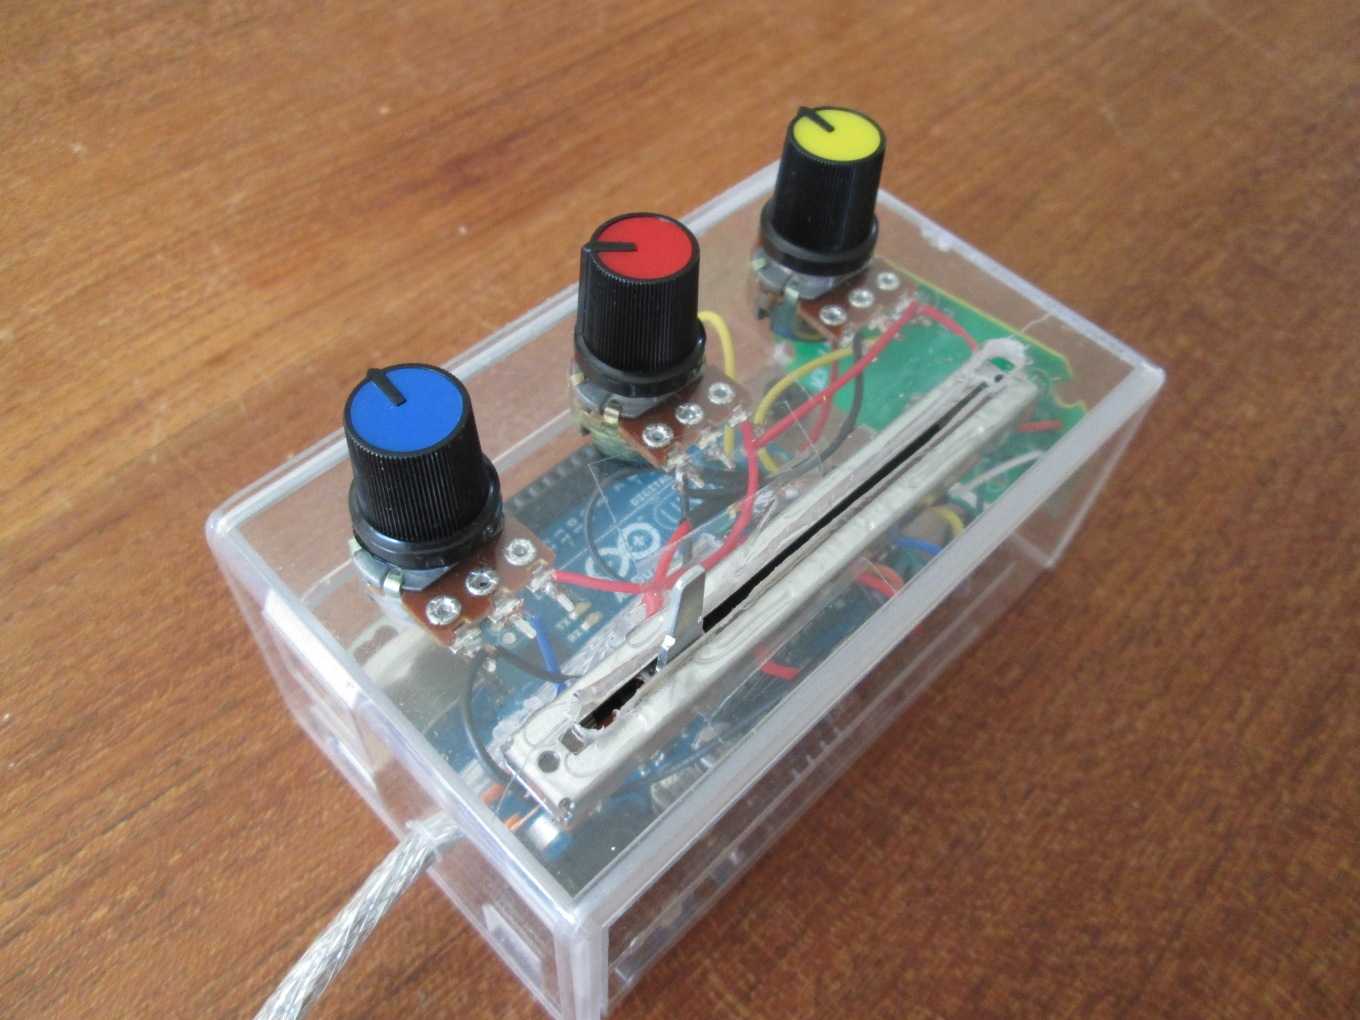 How to make a midi controller with an arduino